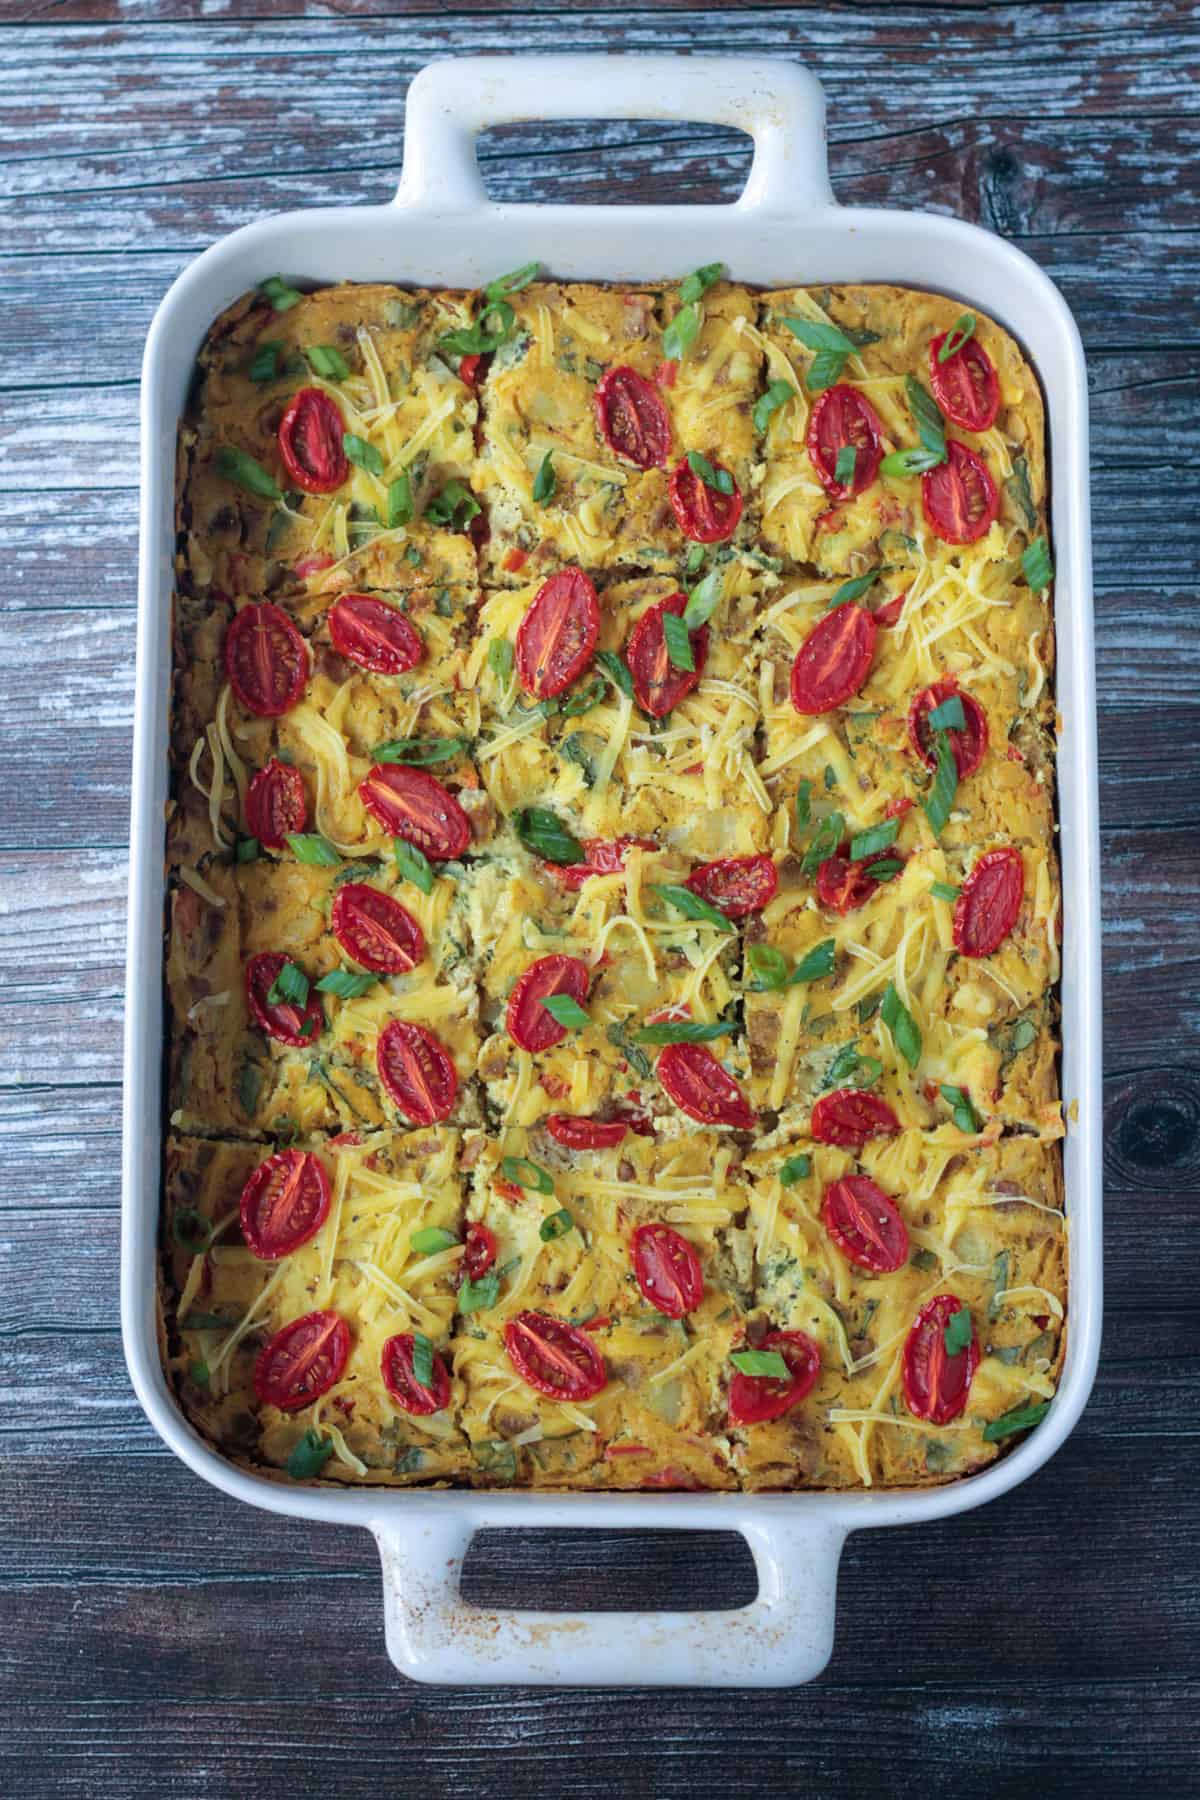 Finished vegan egg casserole cut into12 squares in the baking dish.